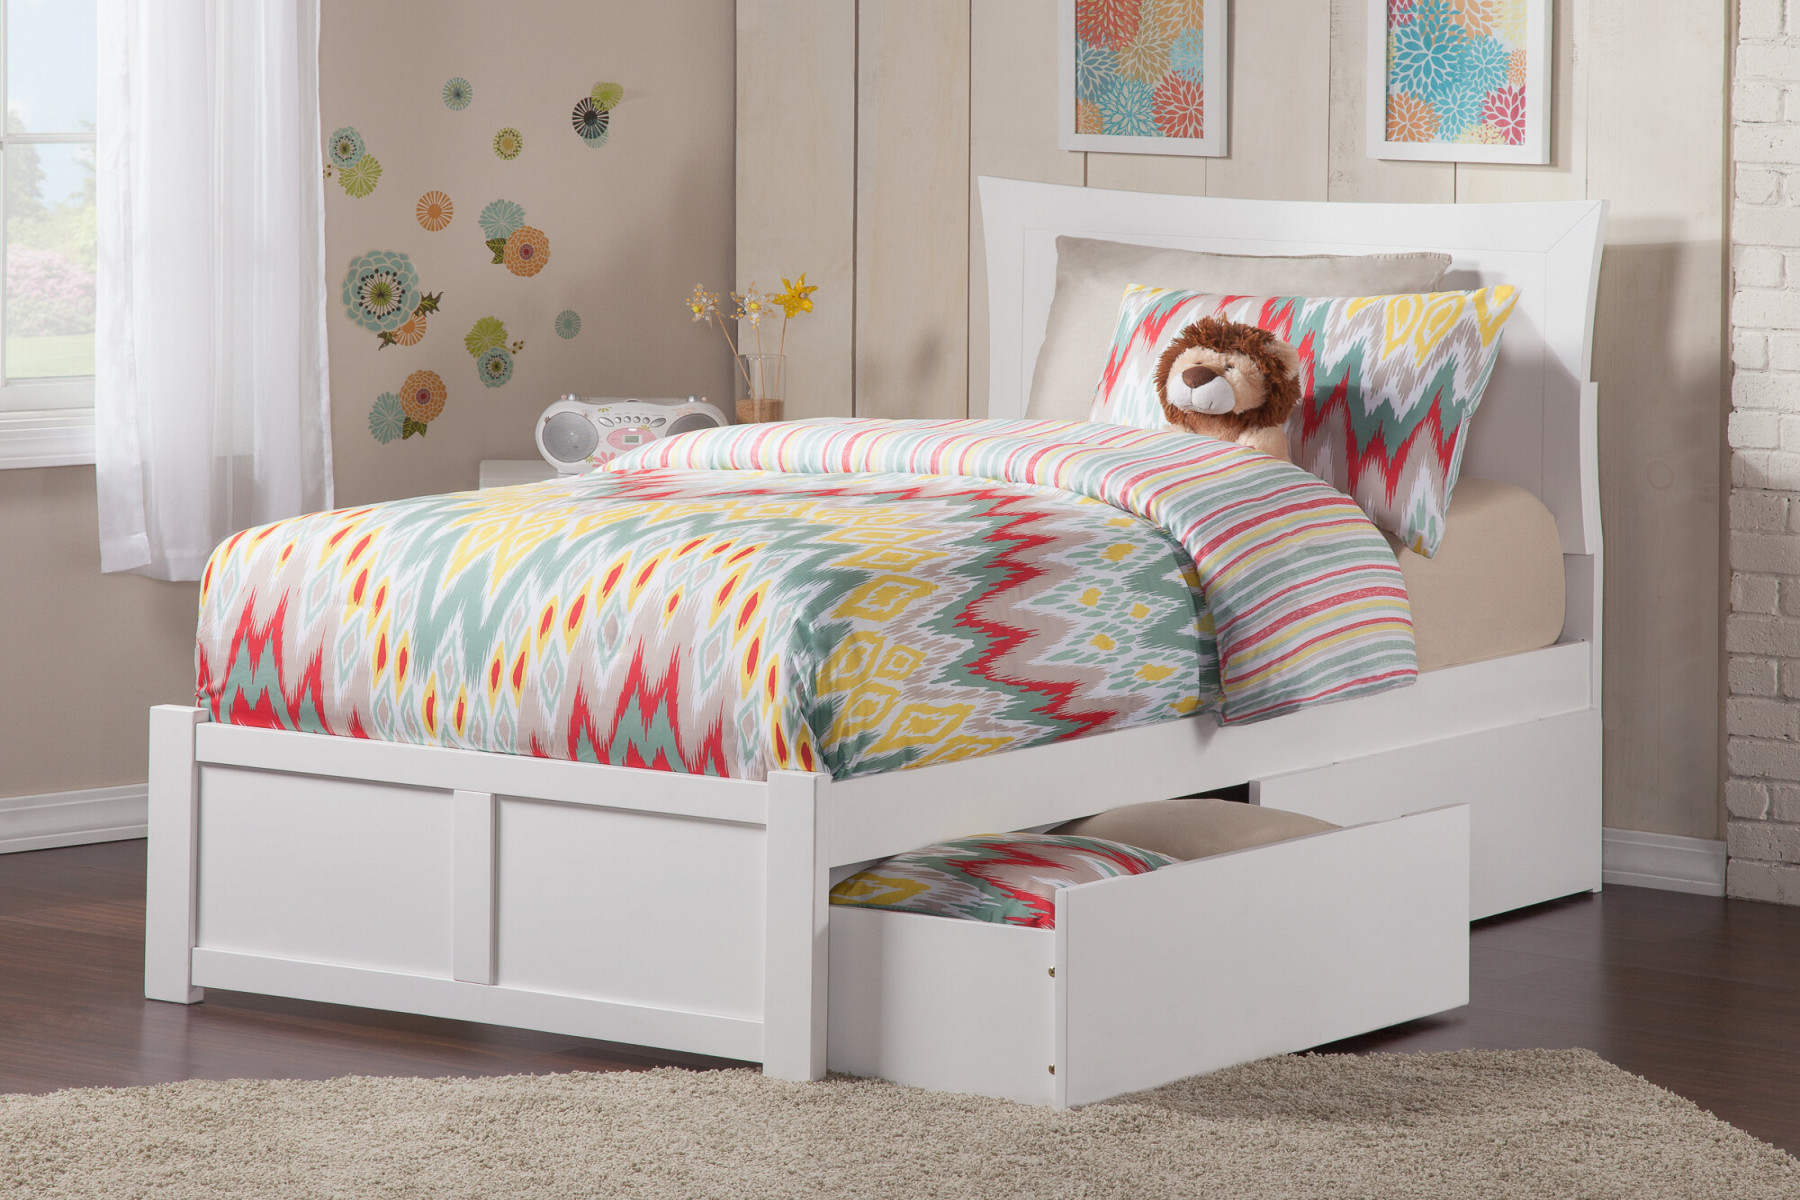 Harriet Bee Daury Extra Long Twin Solid Wood Platforms Bed by